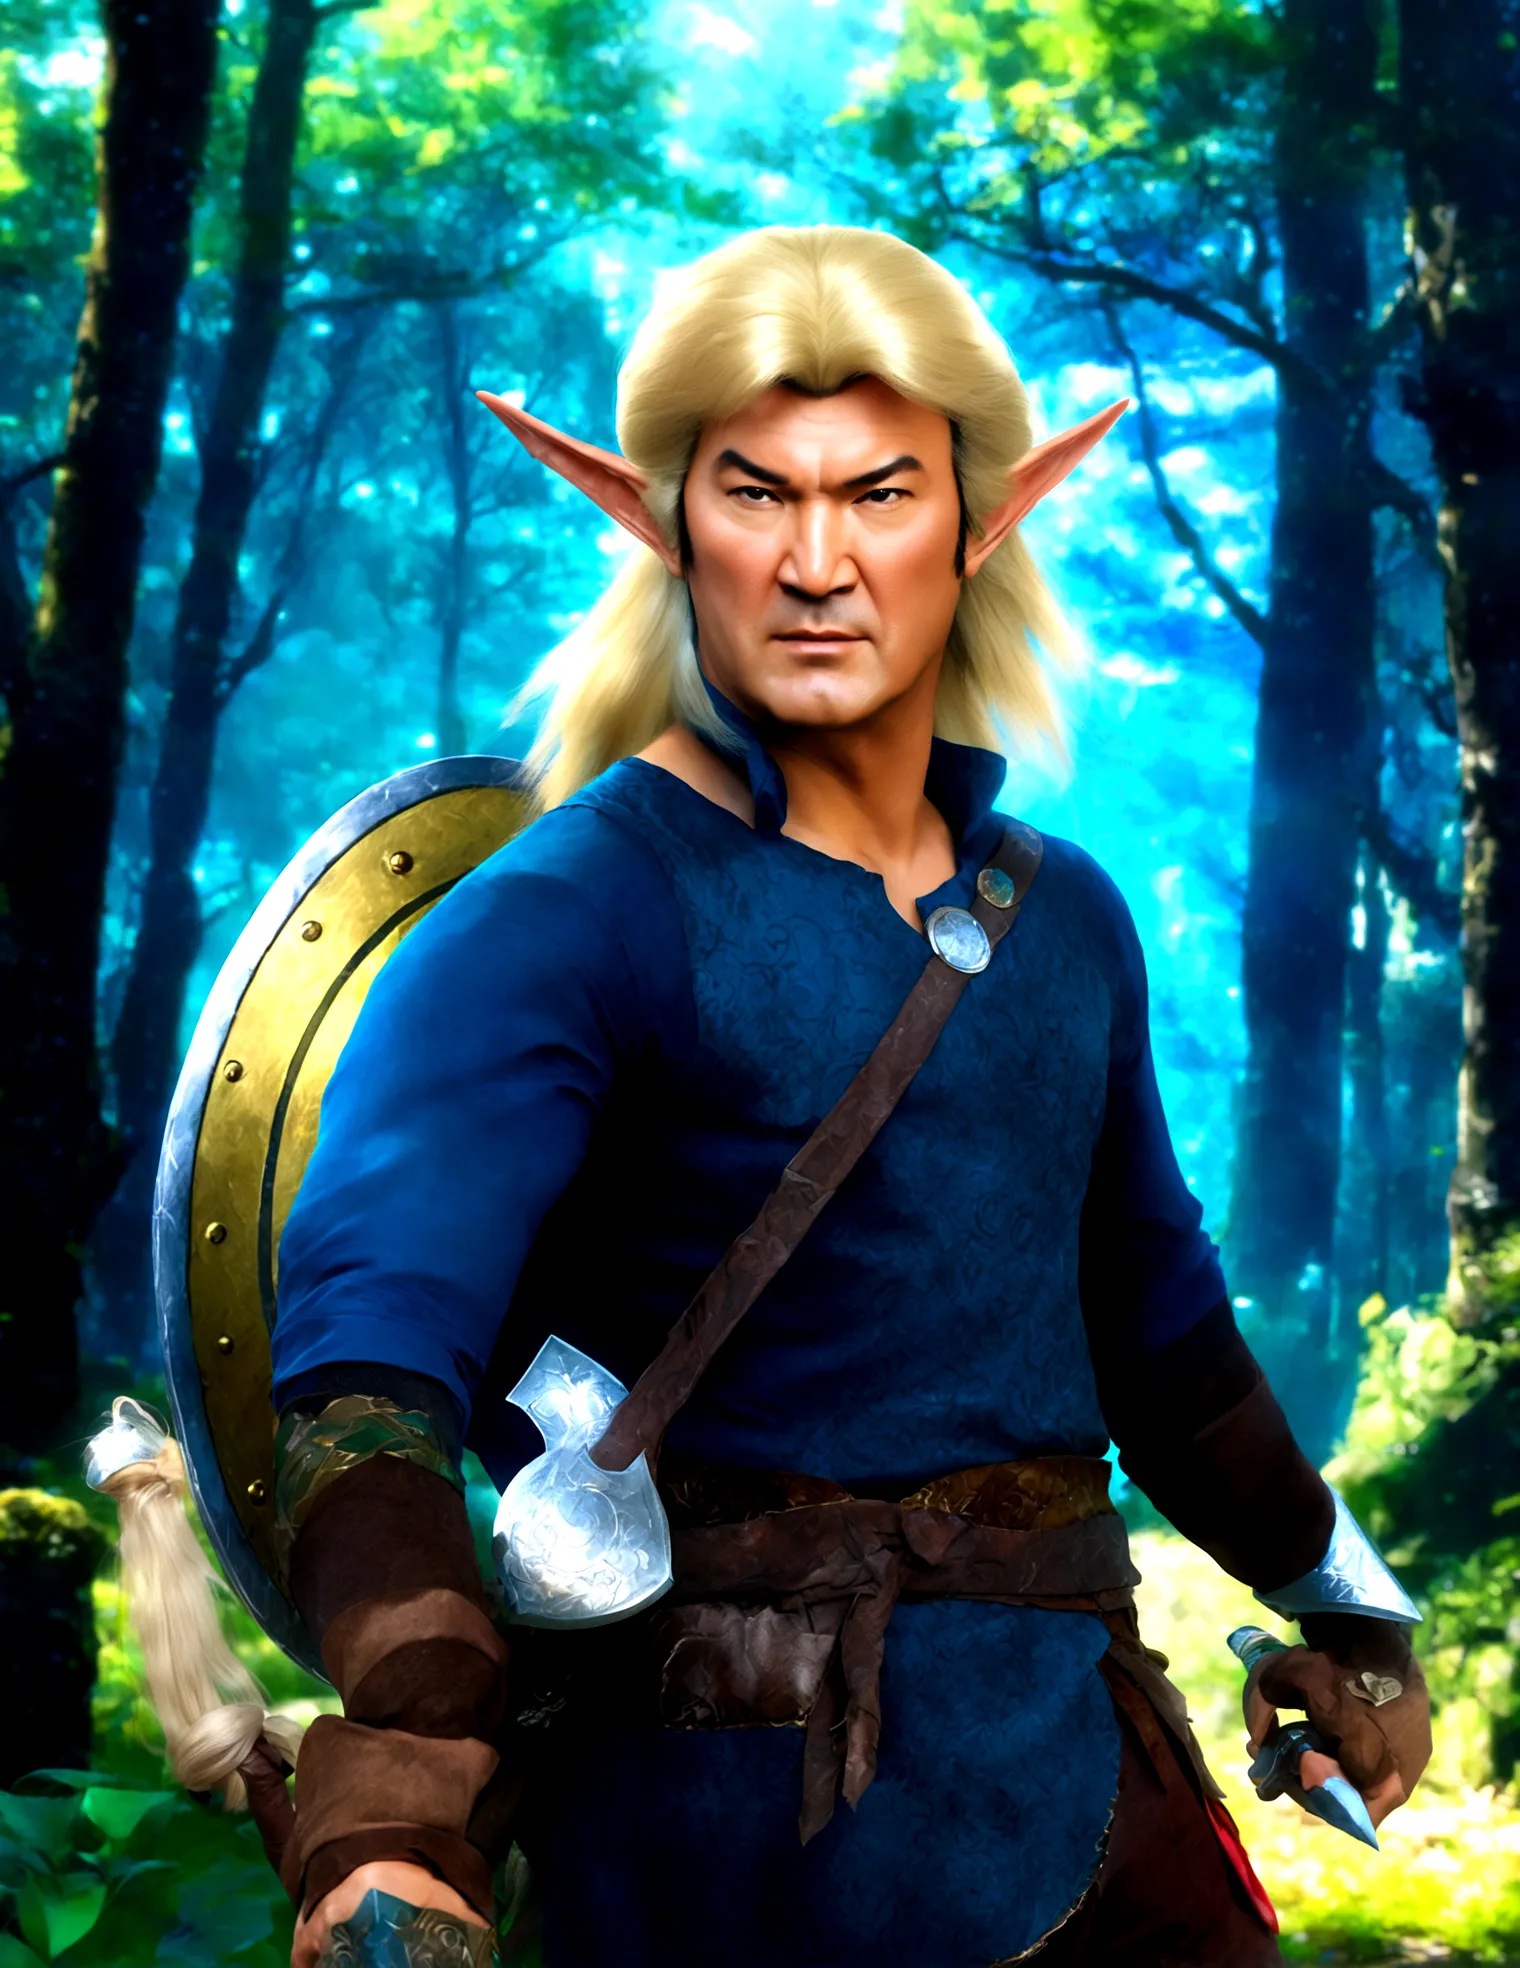 a Steven Seagal as Link, blonde wig over black hair, elf ears, Link's shield on arm, akido pose, forest background, small magic ...